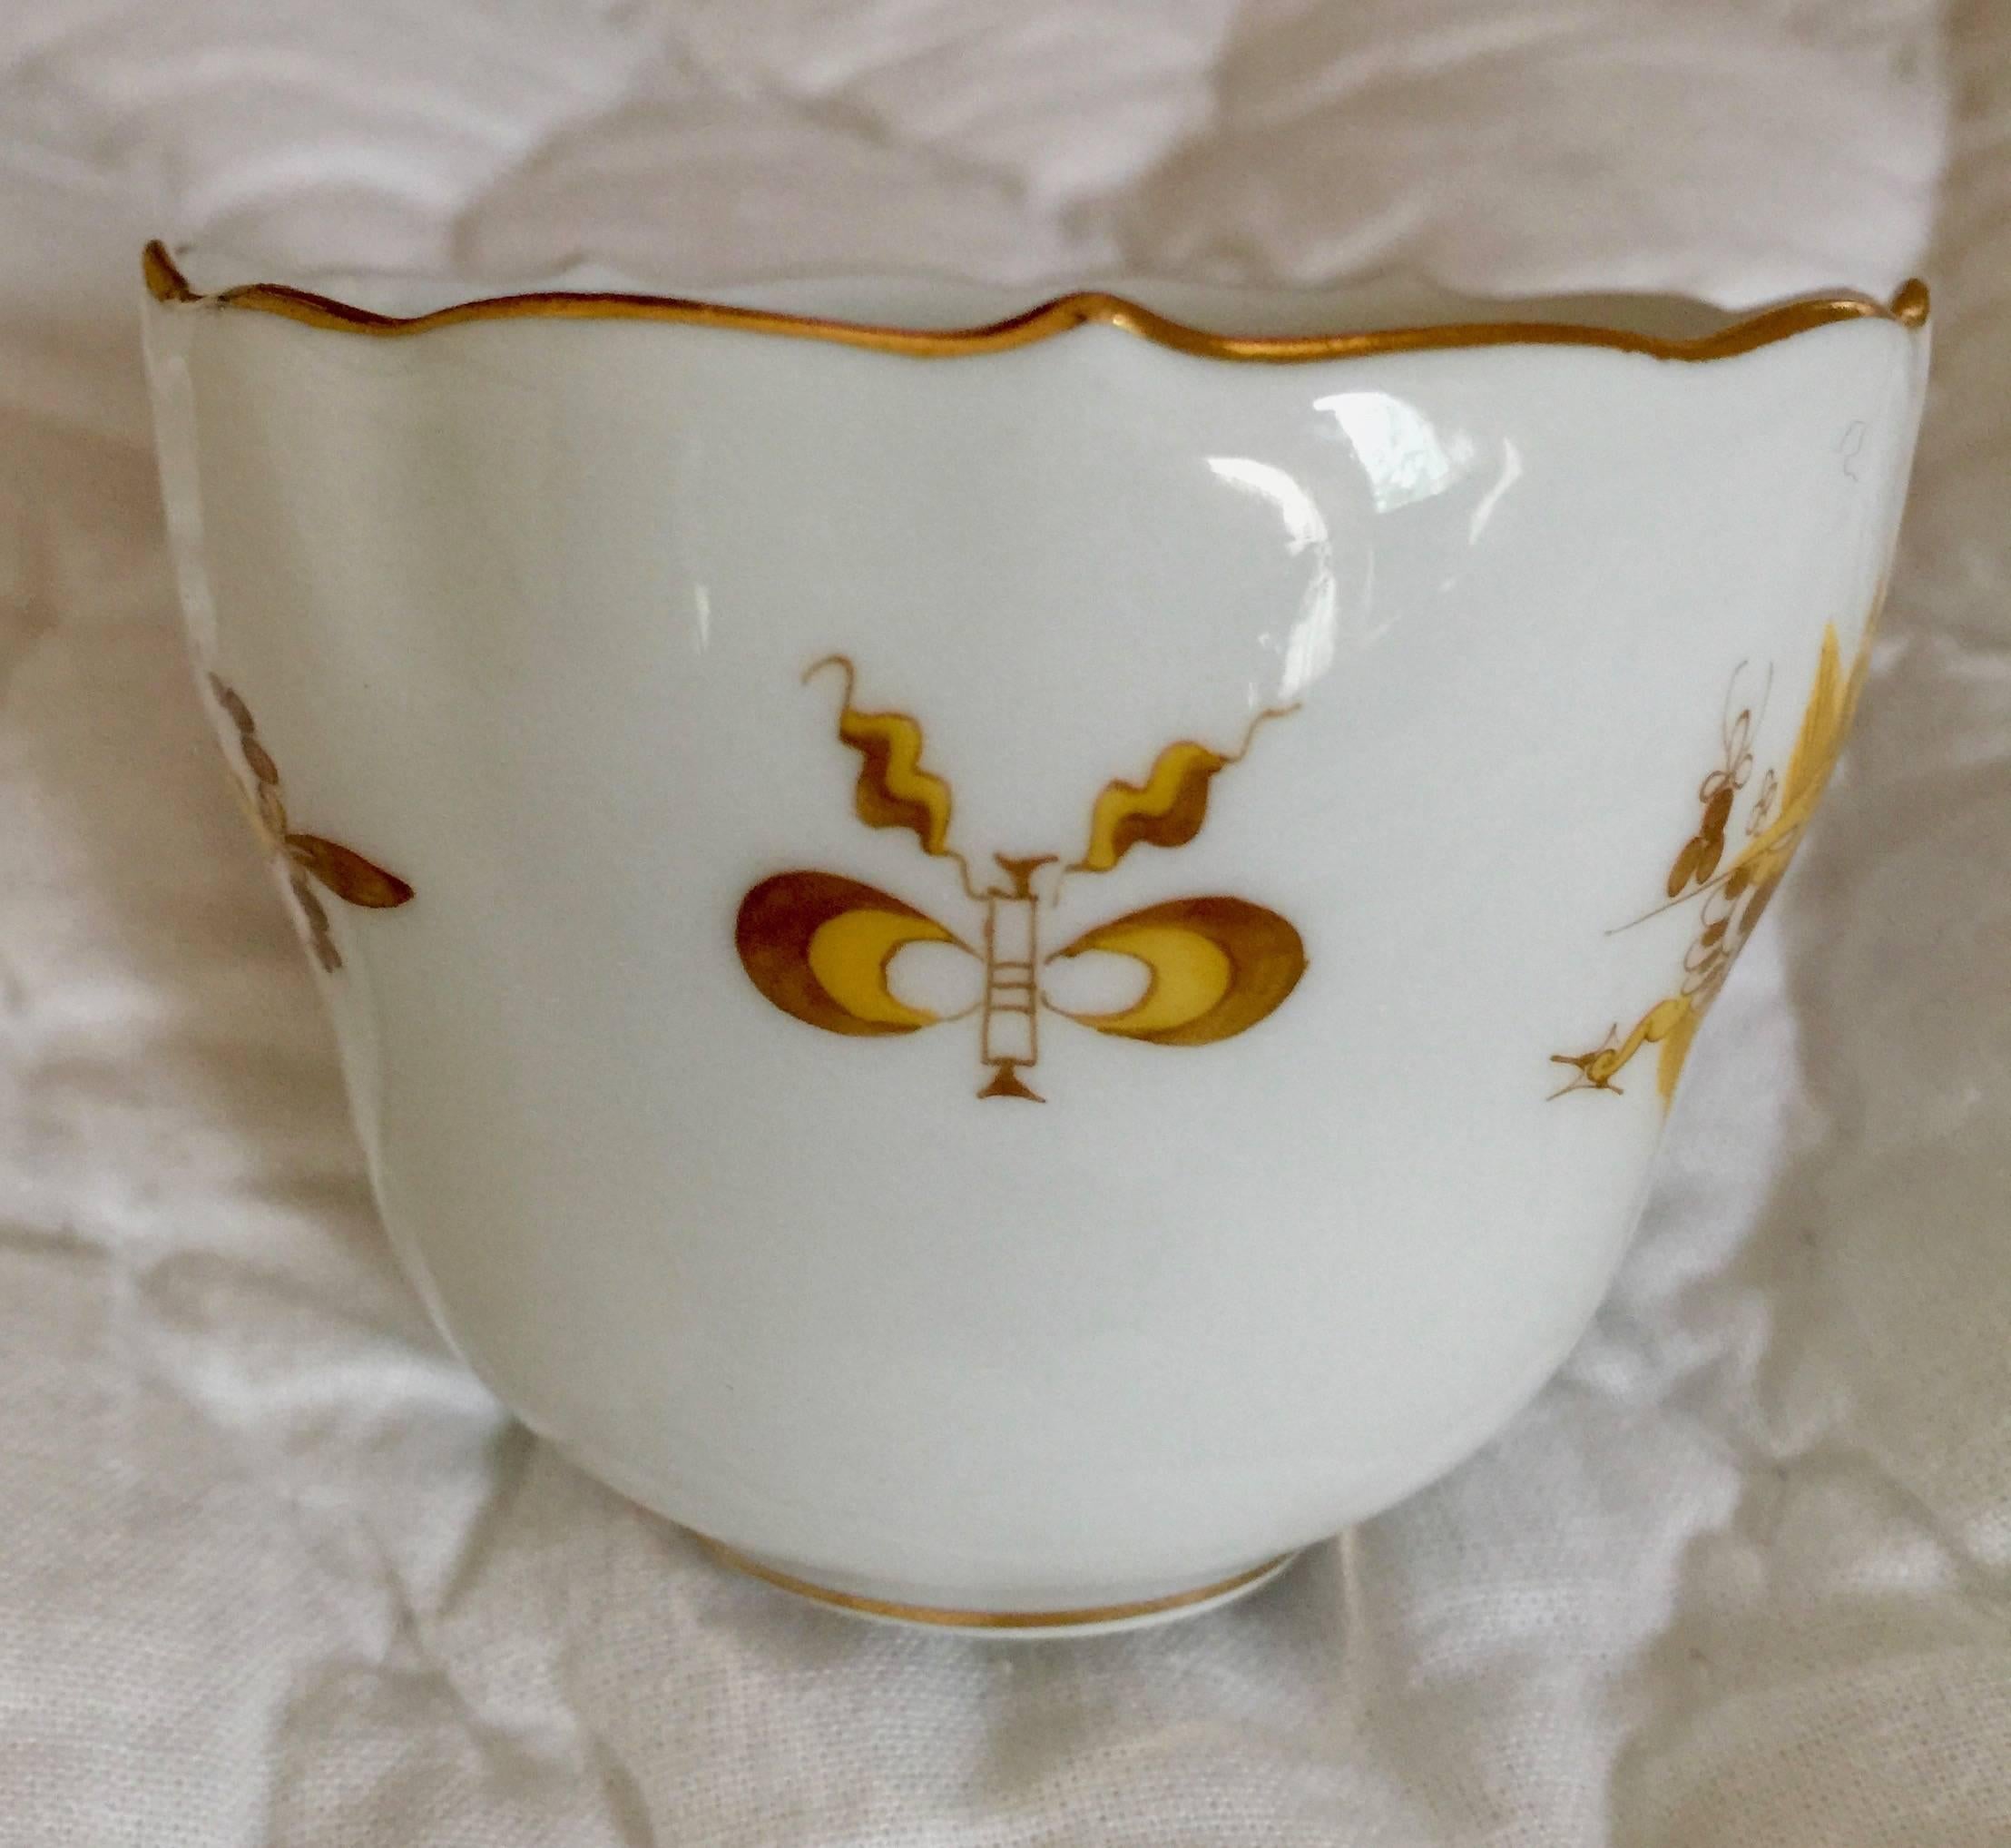 19th Century Meissen Porcelain Scalloped Yellow Dragon Demitasse Cup and Saucer 1